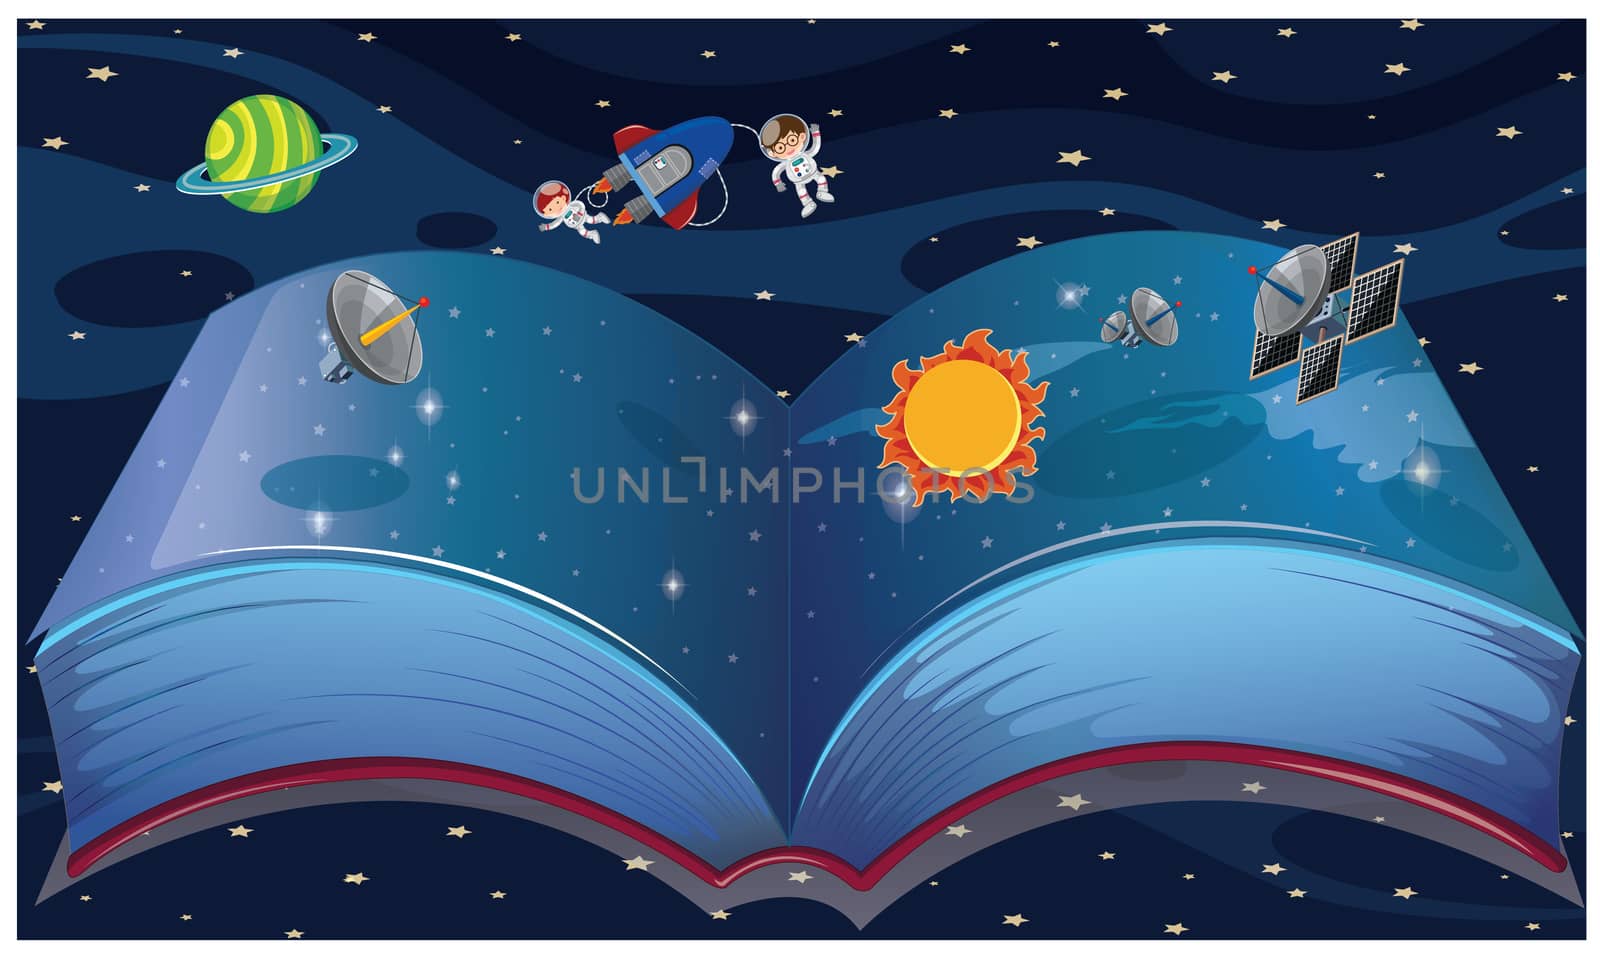 book contains complete space knowledge with actual things by aanavcreationsplus